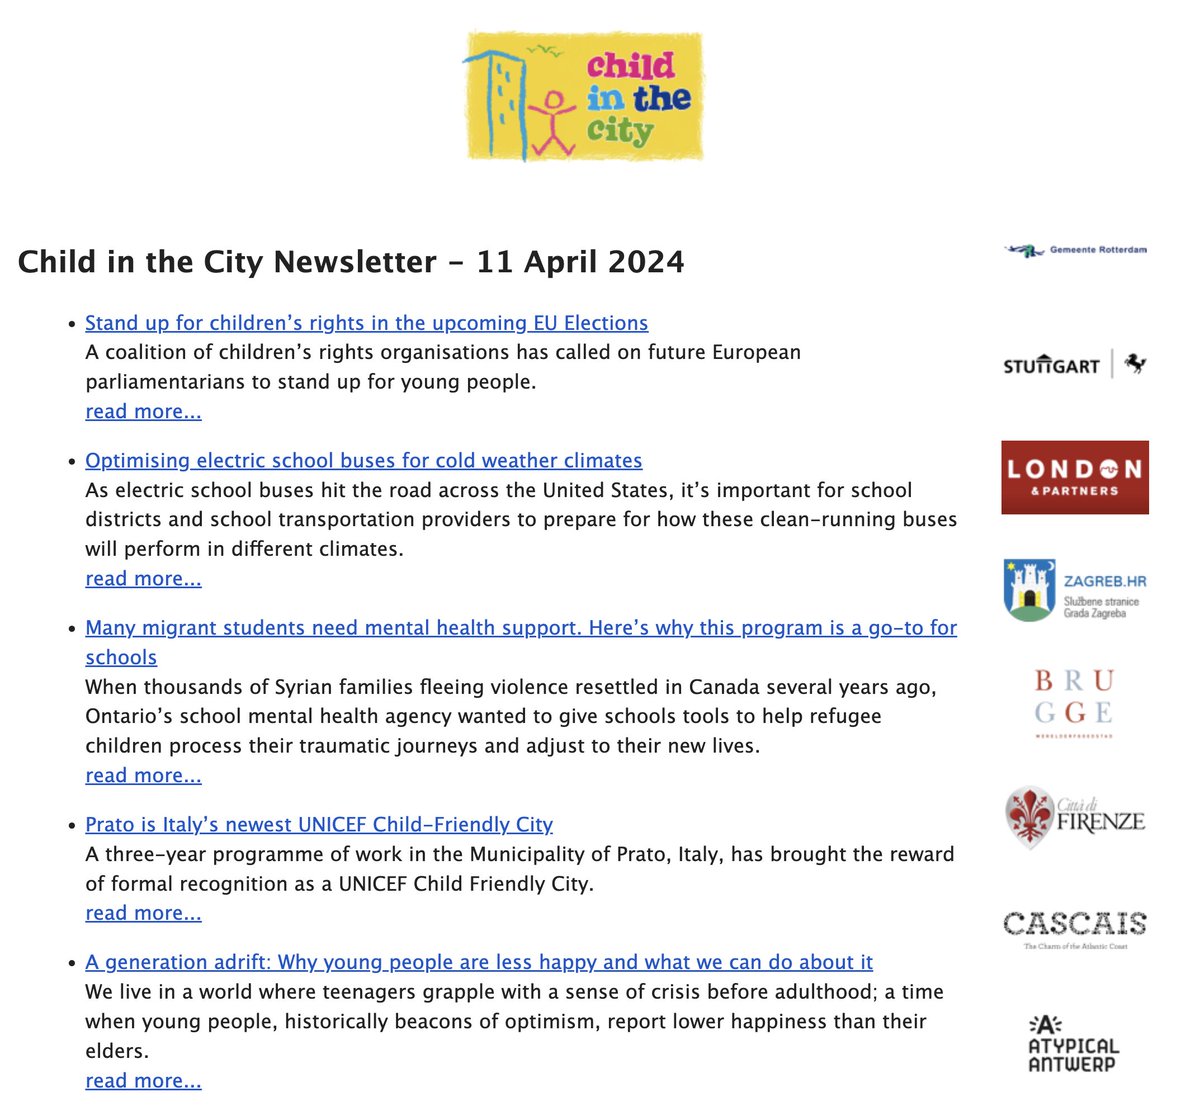 Hi everyone, this week's newsletter includes details of how a coalition of children's rights advocates are urging future #EU parliamentarians to 'stand up' for young people at the forthcoming elections. Sign up for the newsletter at childinthecity.org